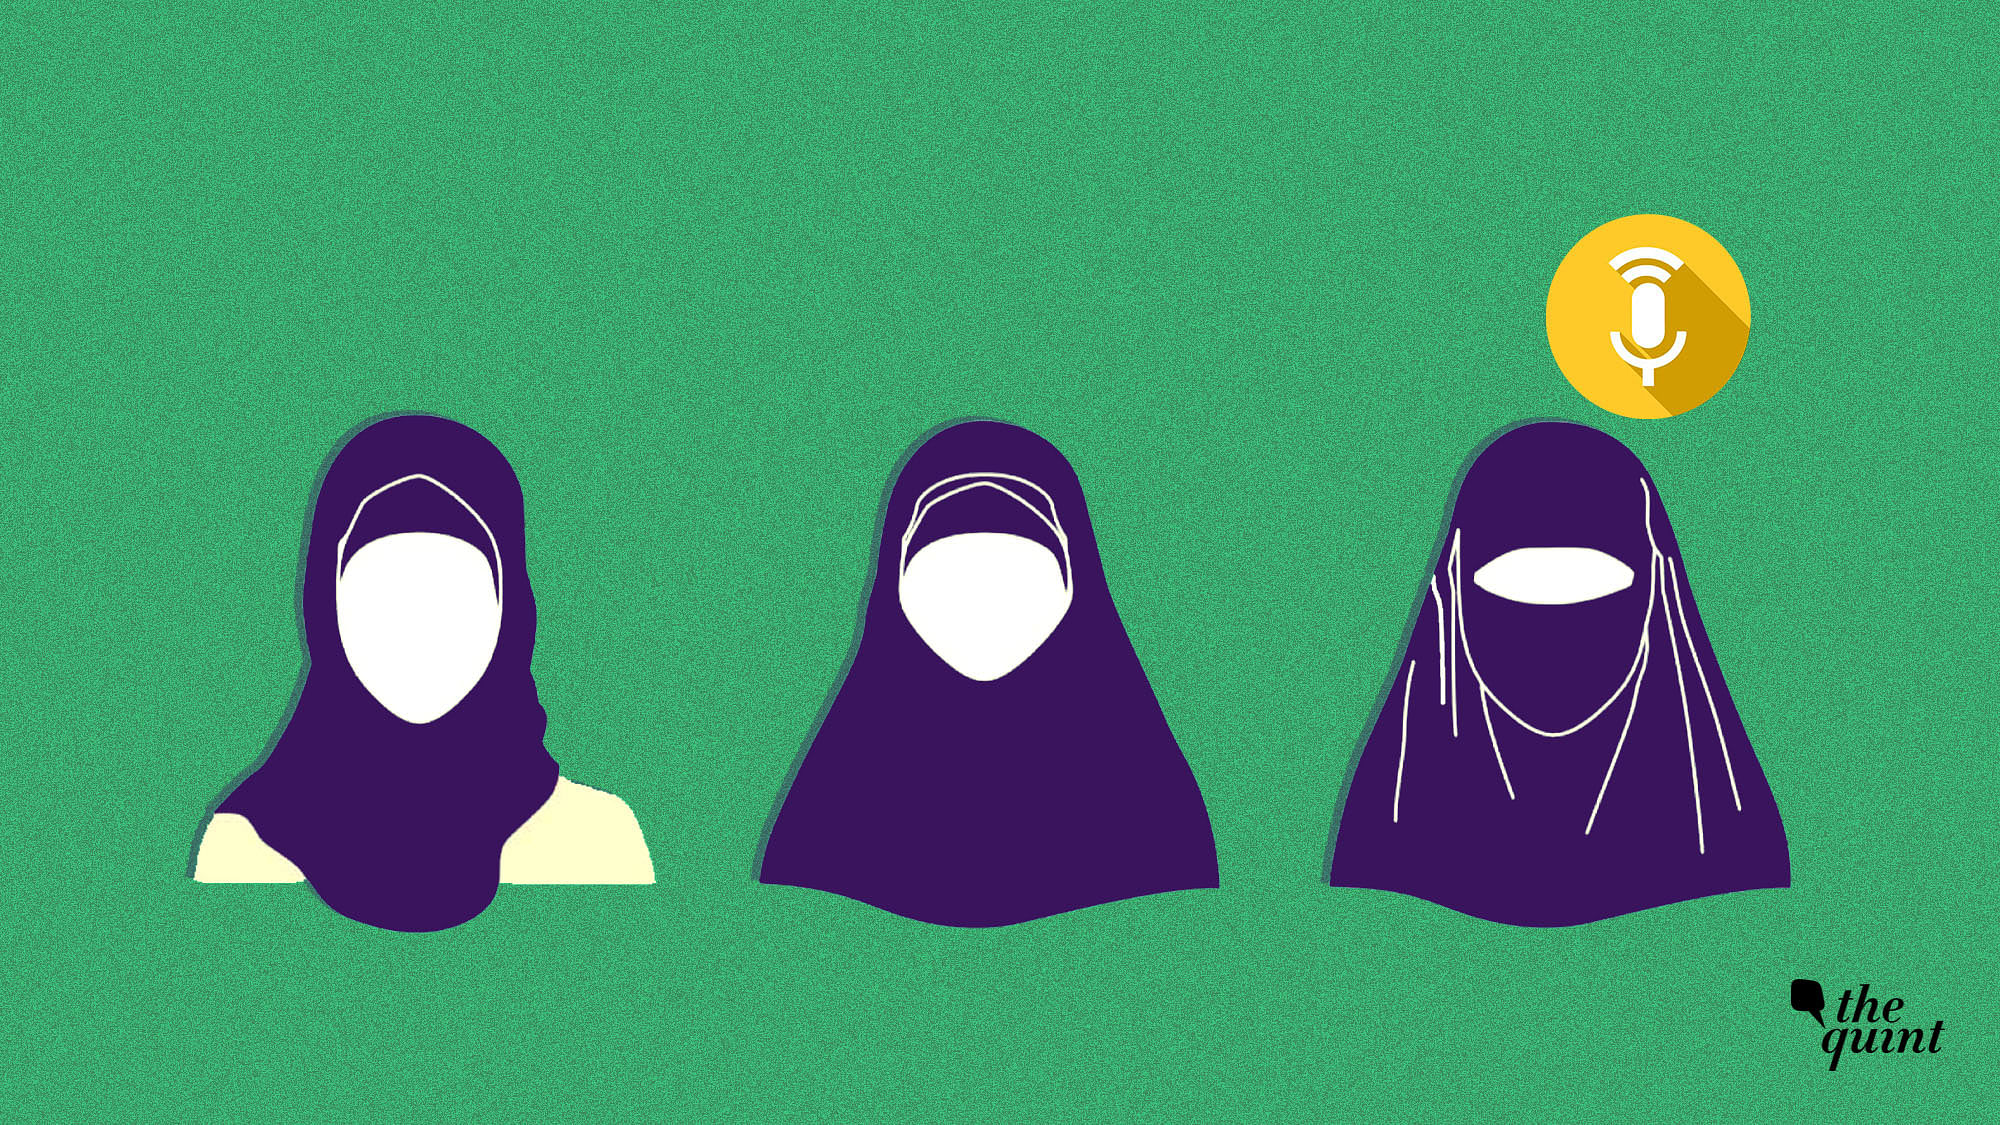 We spoke to Muslim women from across India to understand what they thought about this and answer a few questions.